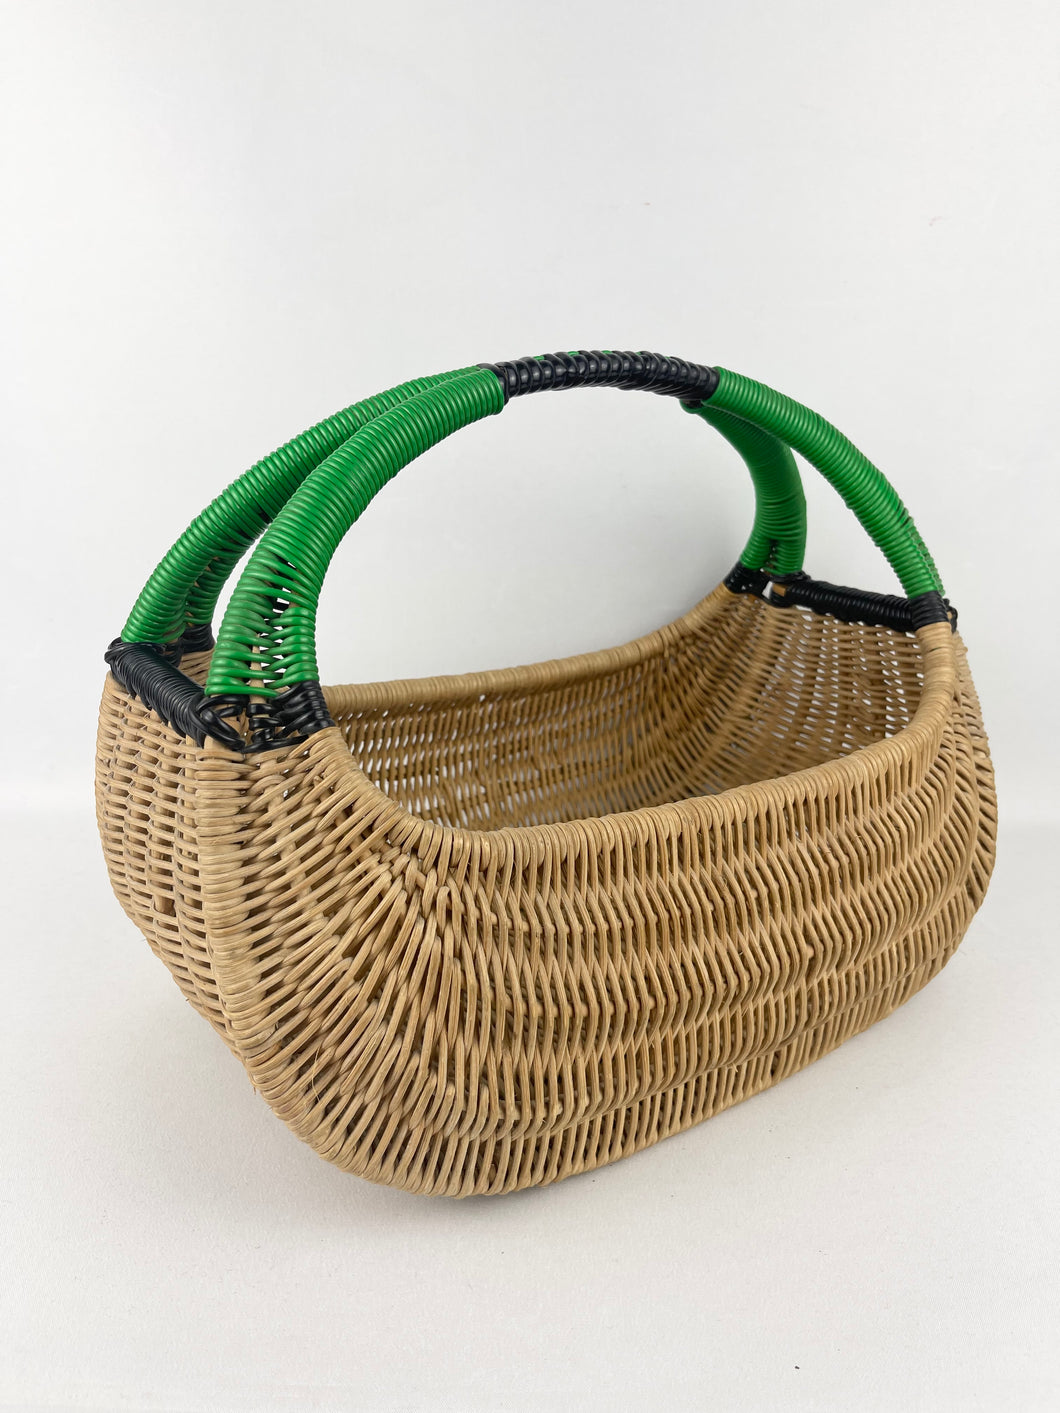 Original 1930's Wicker Basket with Black and Green Trim - Perfect Picnic Basket